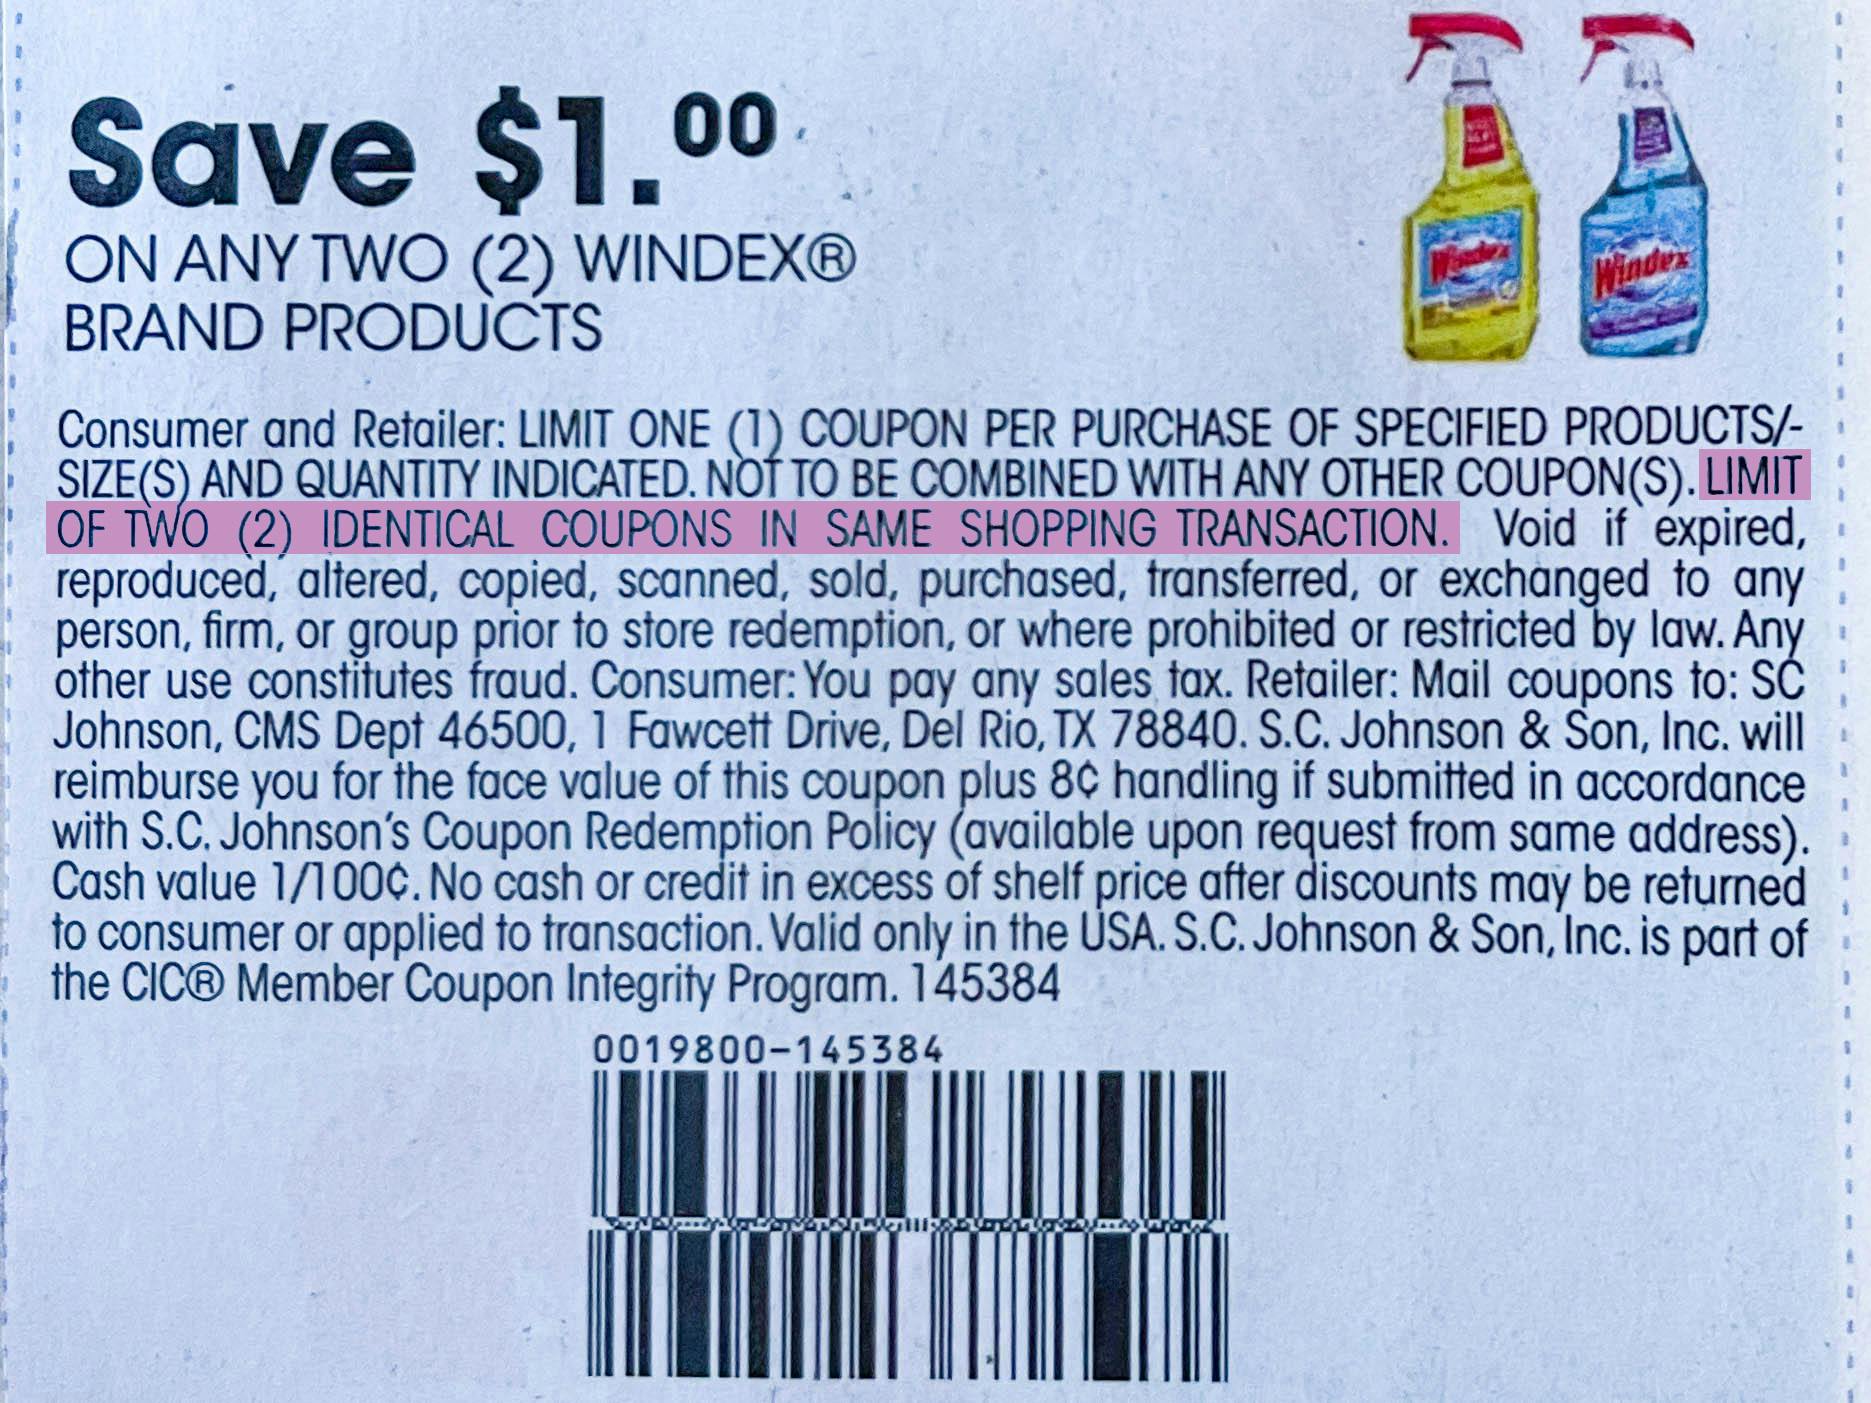 A close up on a coupon for Windex with the fine print highlighted that says, "Limit of two identical coupons in same shopping transaction